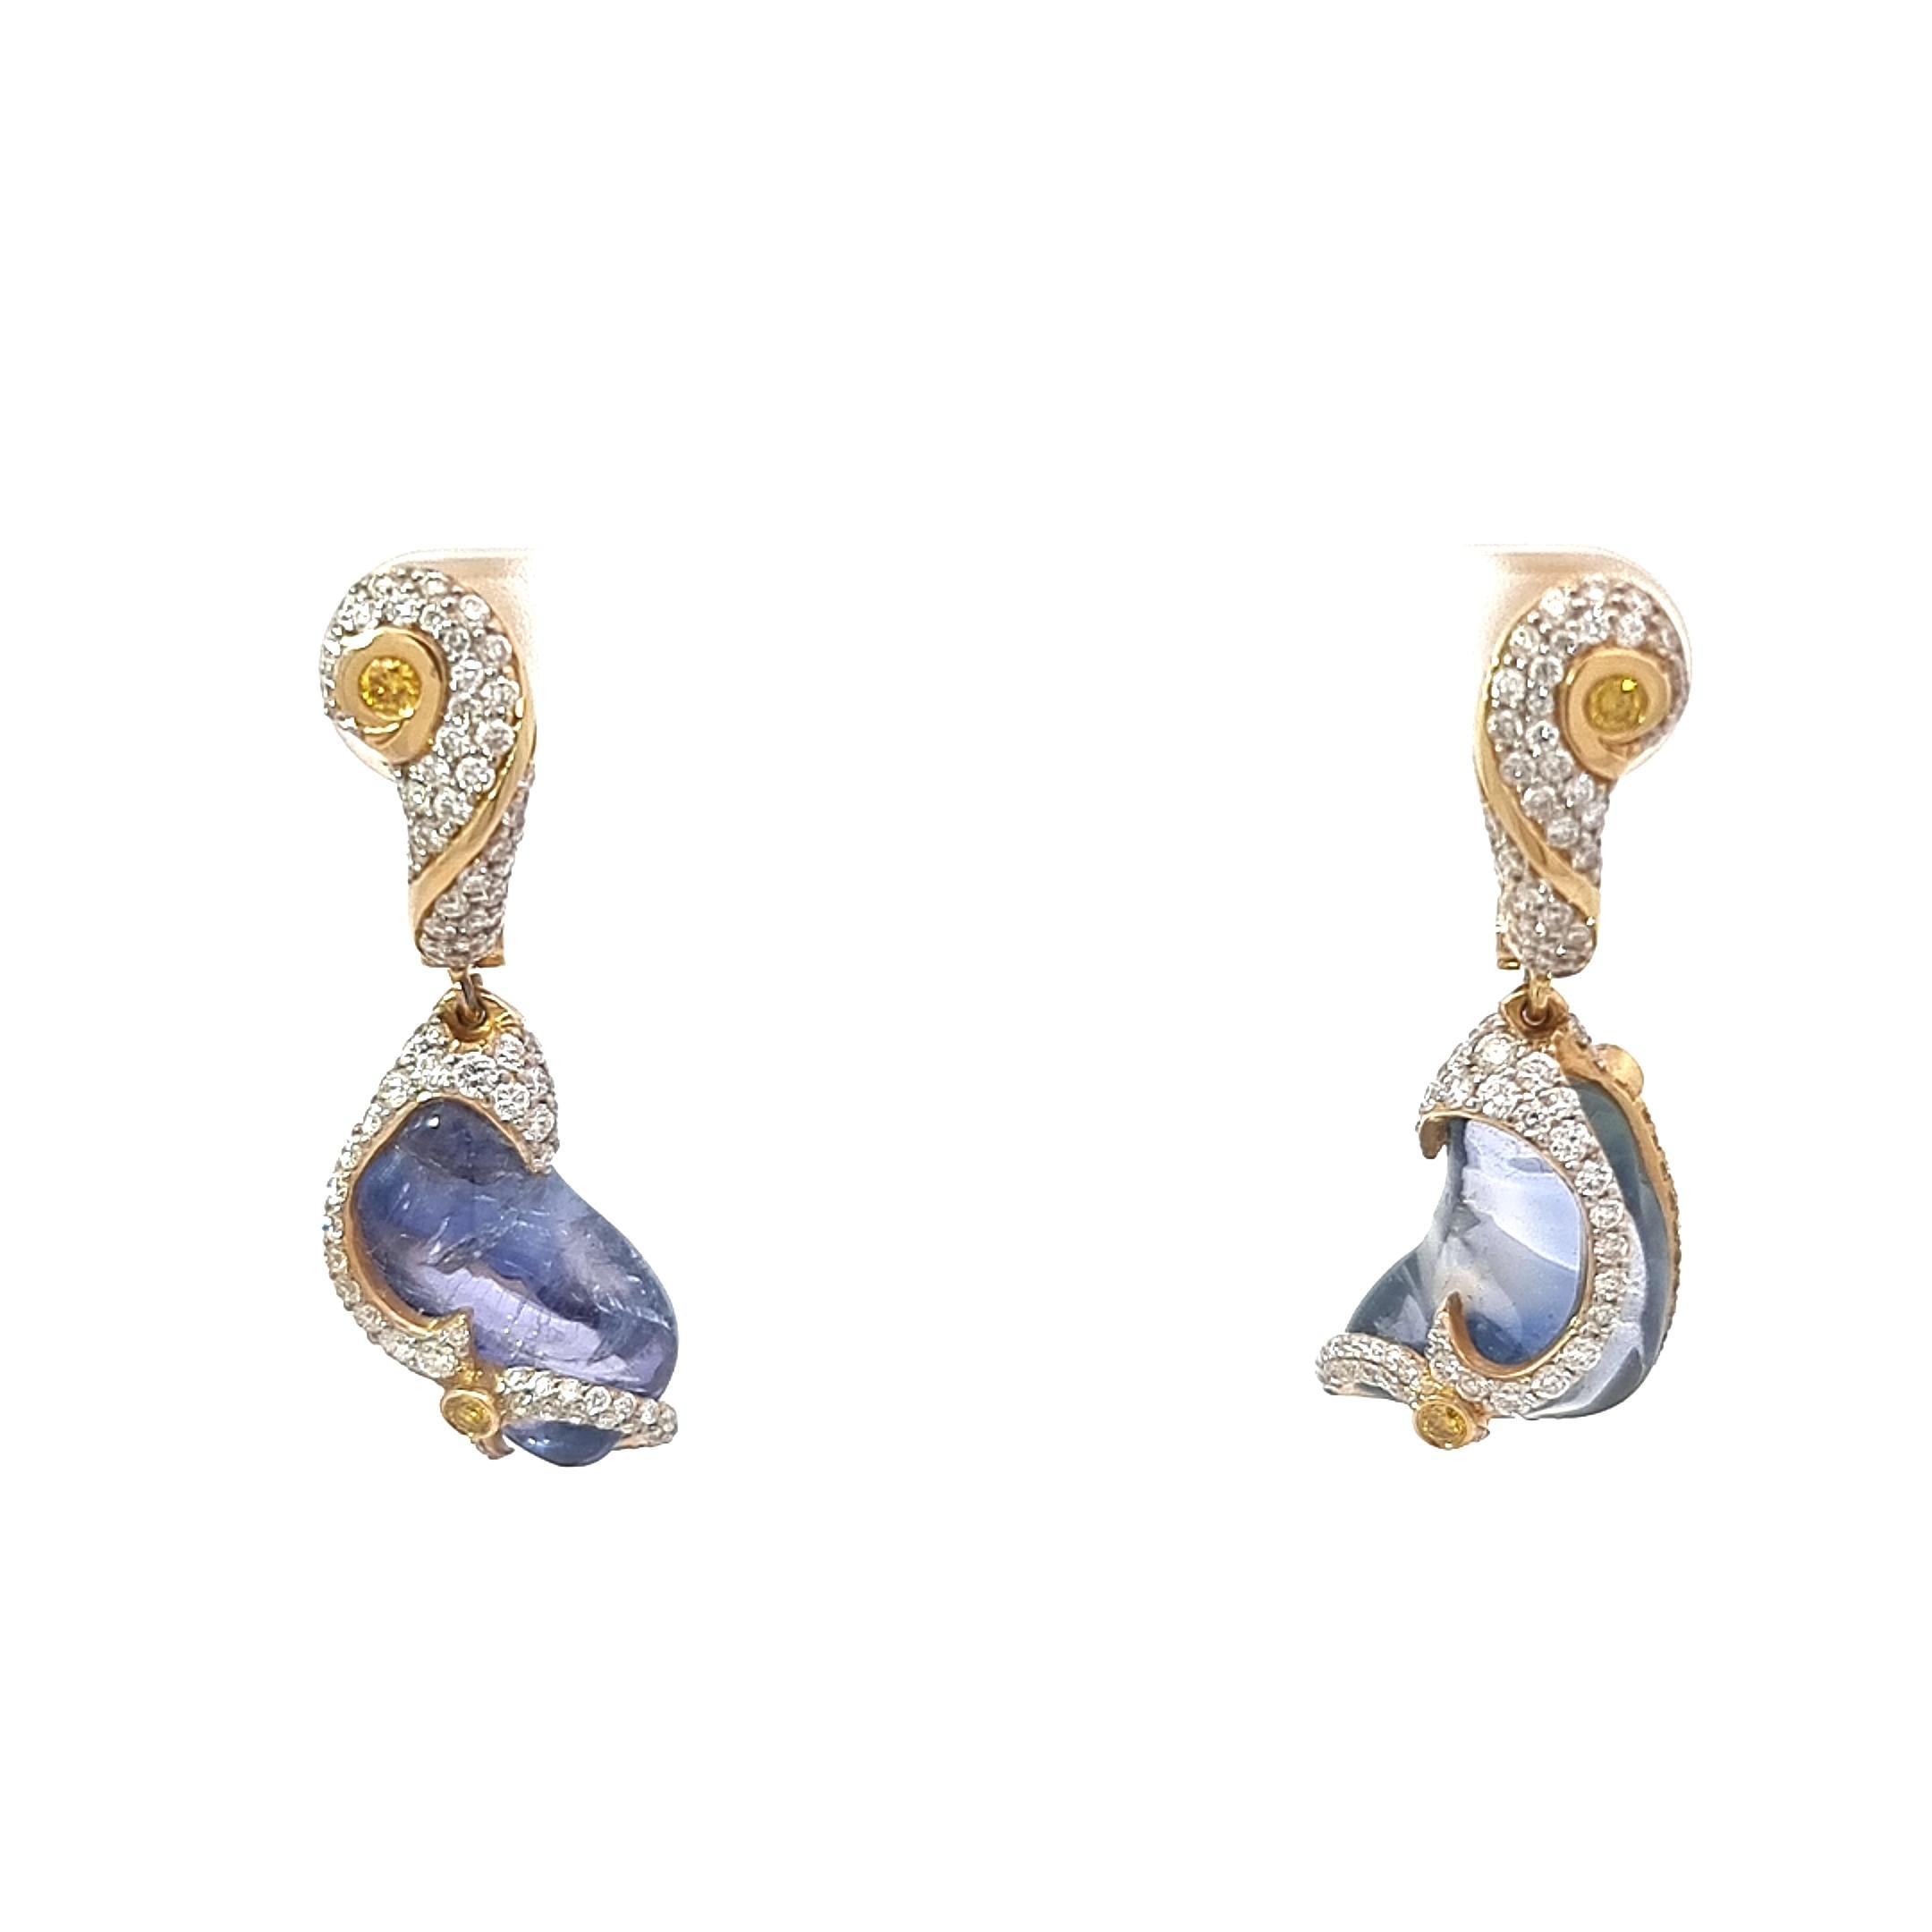 Organic Collection by VOTIVE.

Imagine adorning yourself with a pair of exquisite 18K gold dangling earrings that are truly one-of-a-kind. These earrings are a fusion of artistry and nature's whimsy, an enchanting celebration of the organic